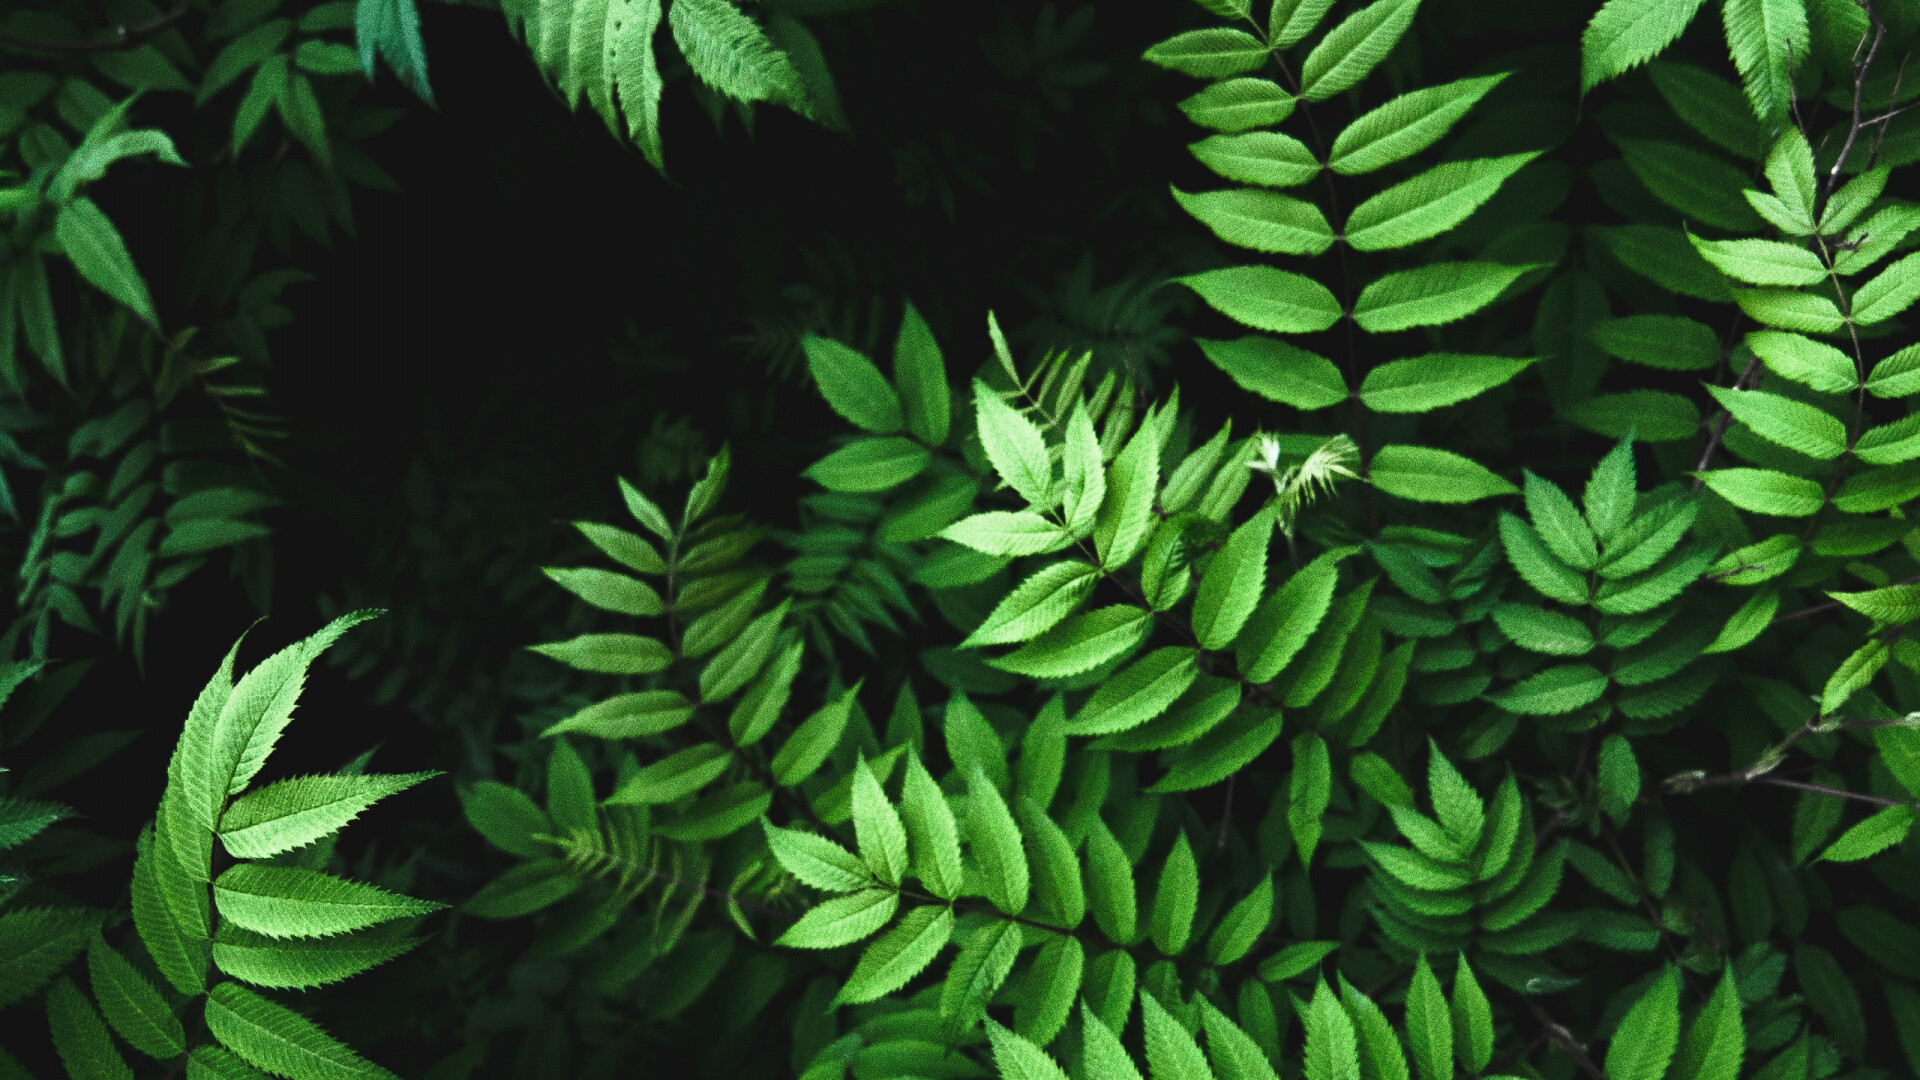 Go Green: Green leaves and light, Plant growth, Photosynthesis, Food manufacturing process in green plants. 1920x1080 Full HD Background.